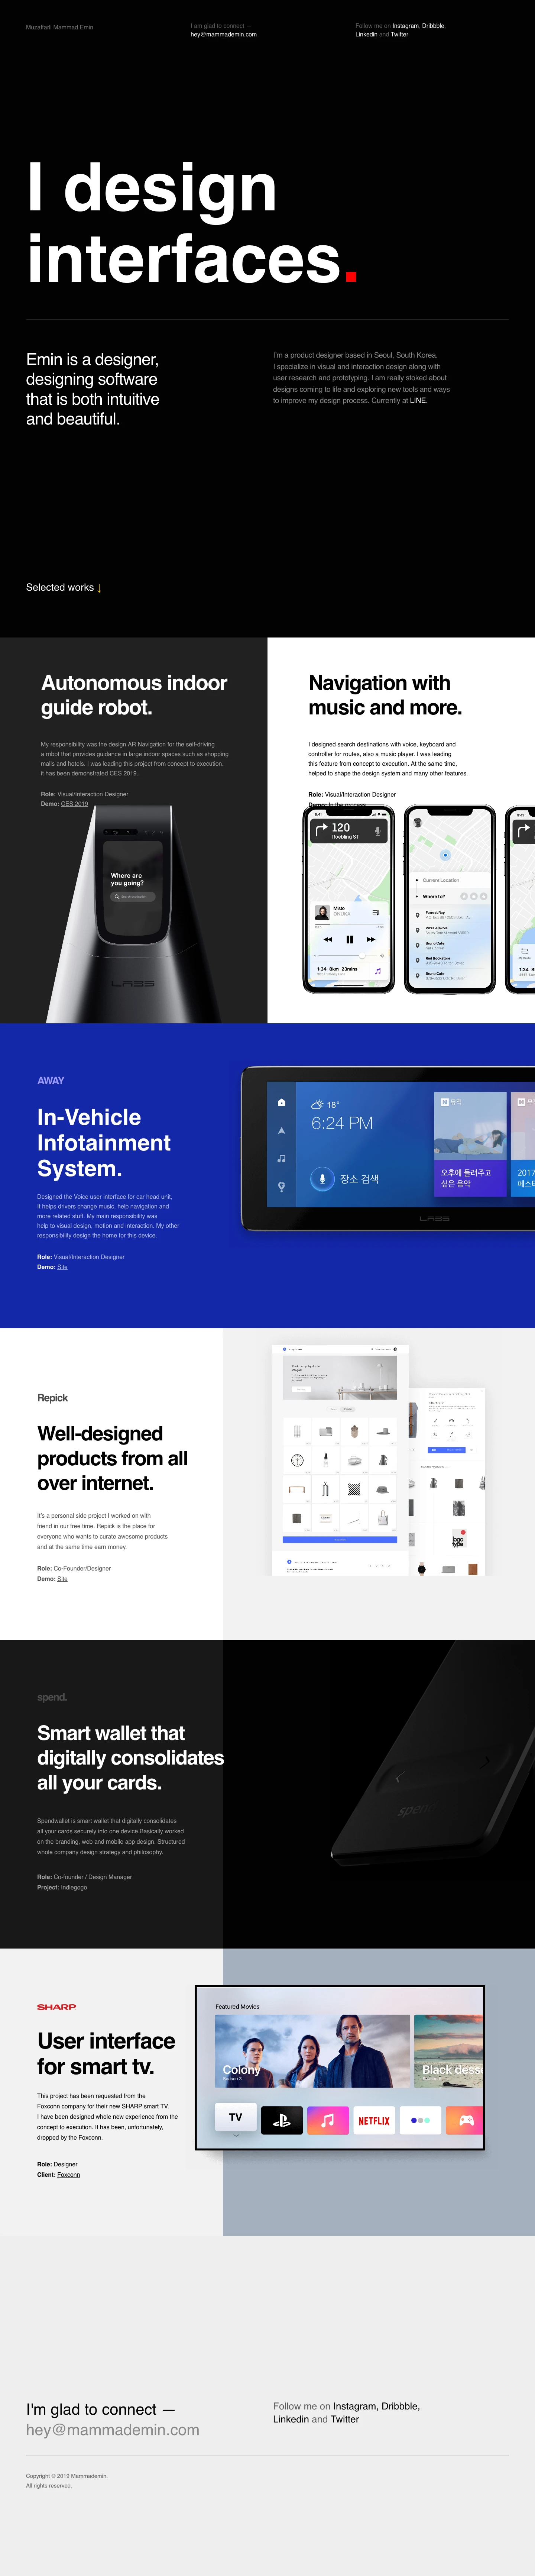 Mammad Emin Landing Page Example: I’m Emin, specialize in visual and interaction design along with user research and prototyping.